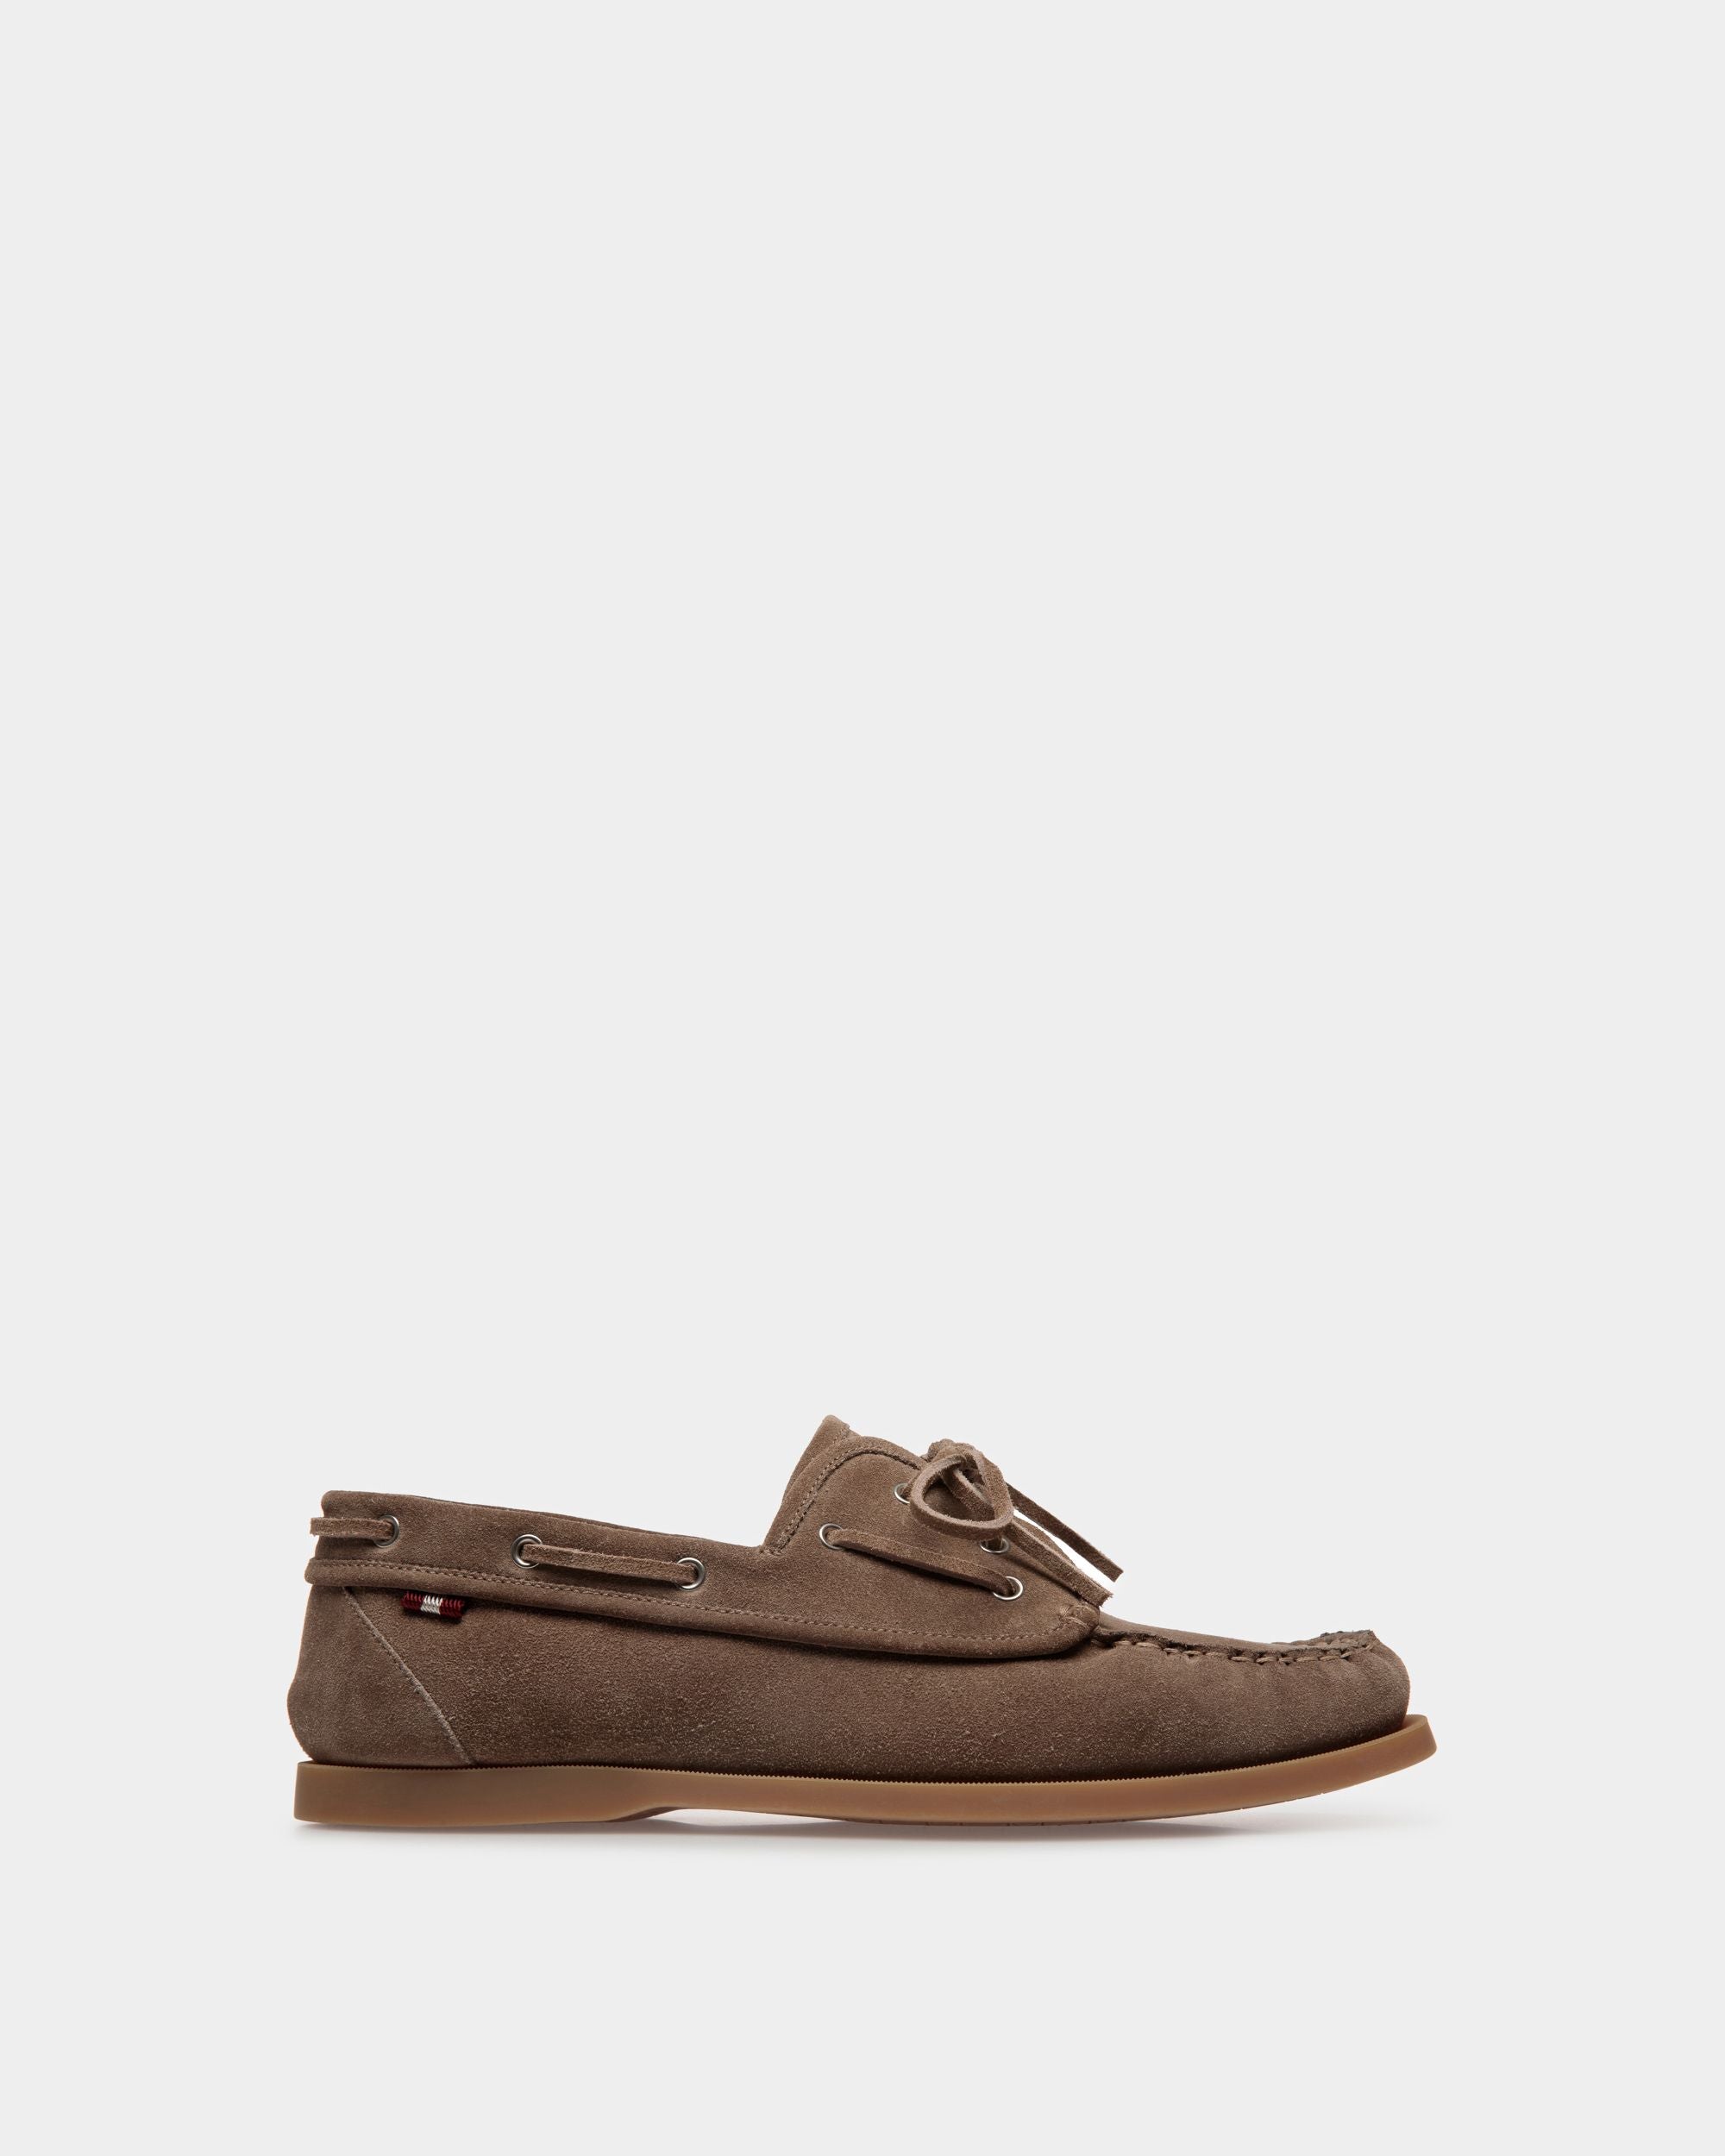 Nelson | Men's Loafer in Beige Suede Leather | Bally | Still Life Side